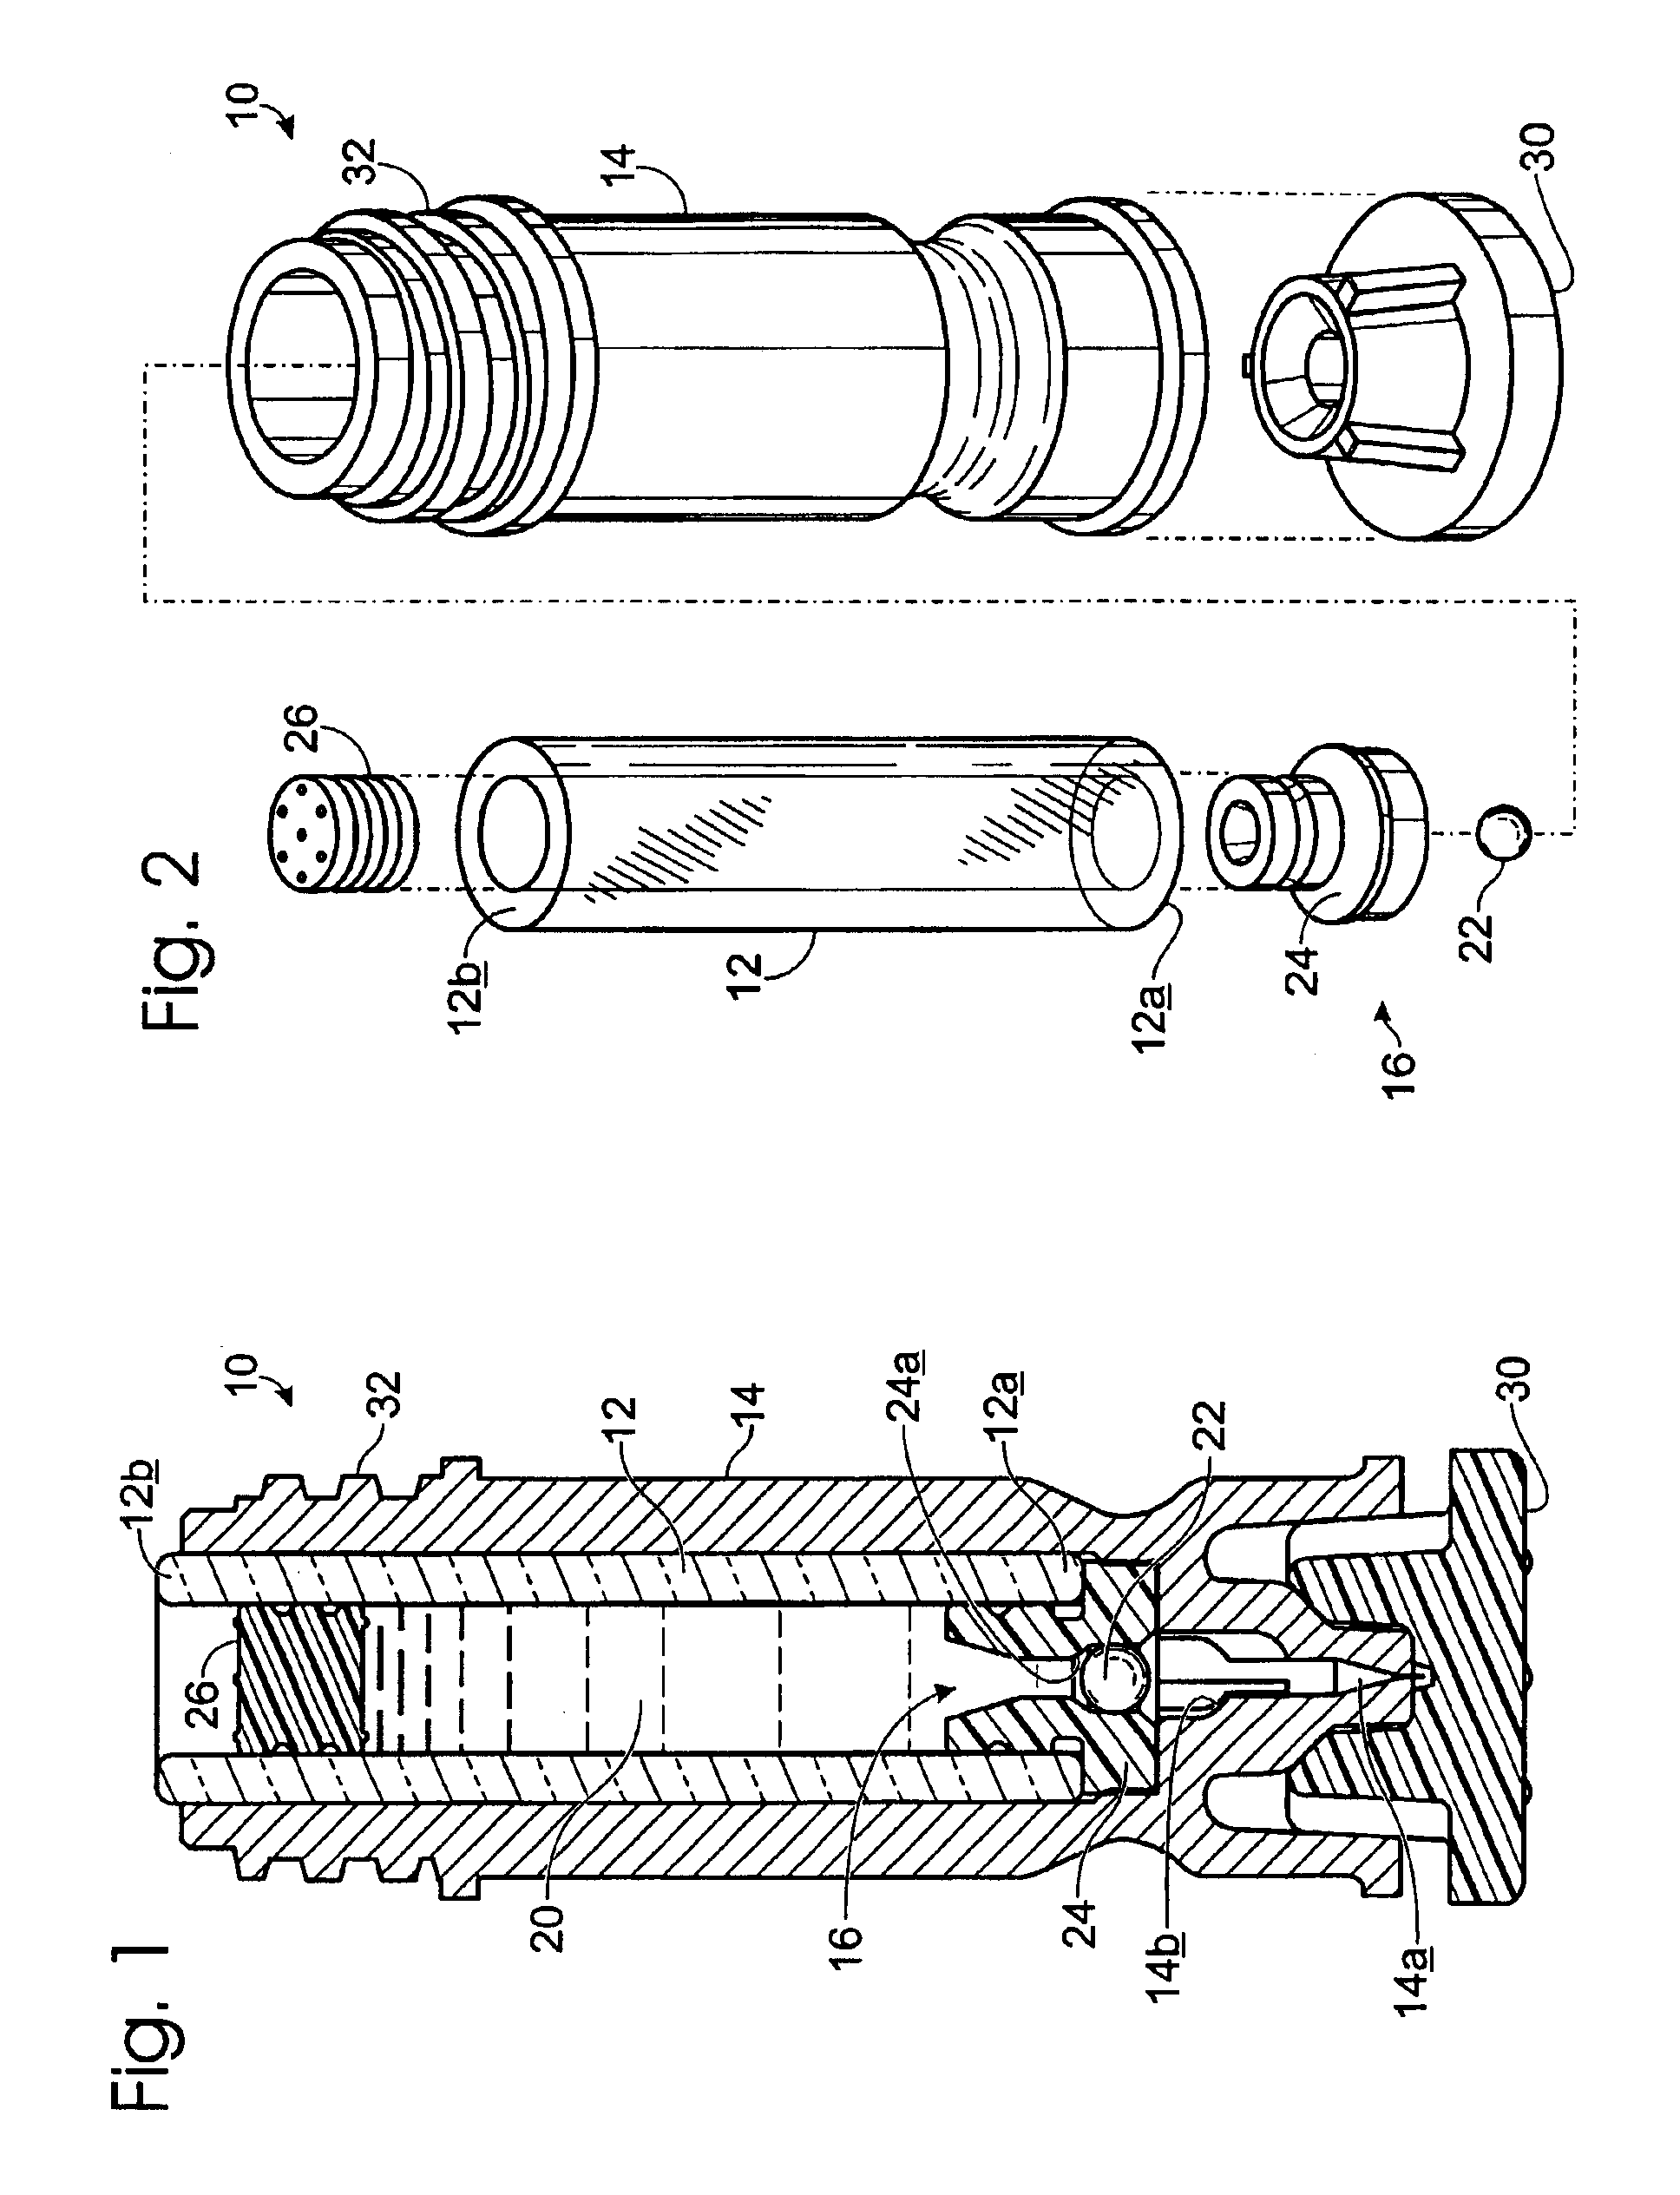 Drug cartridge assembly and method of manufacture